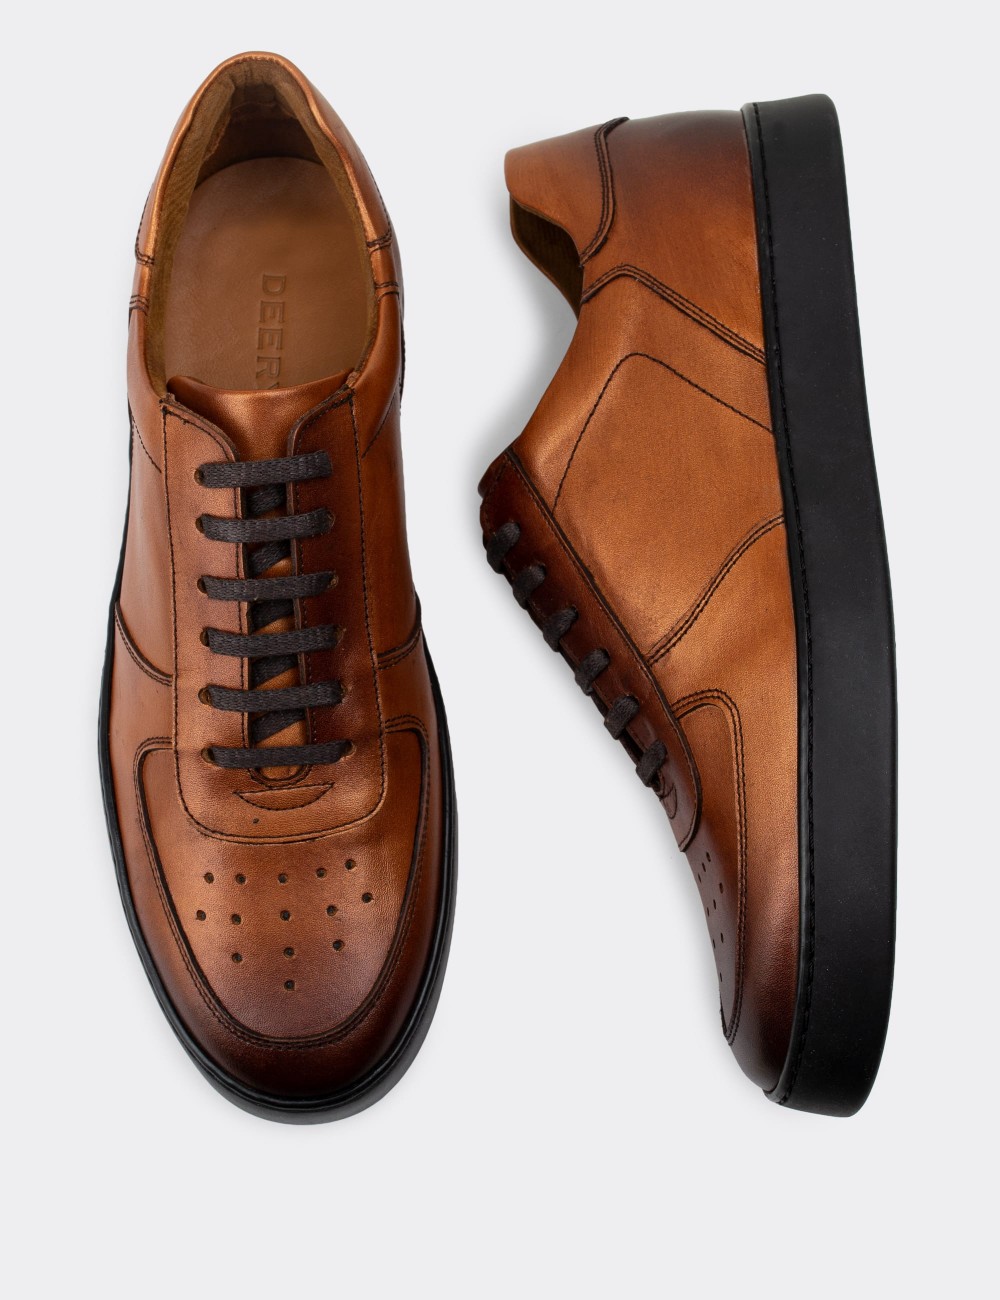 Copper  Leather Sneakers - 01860MBKRC01